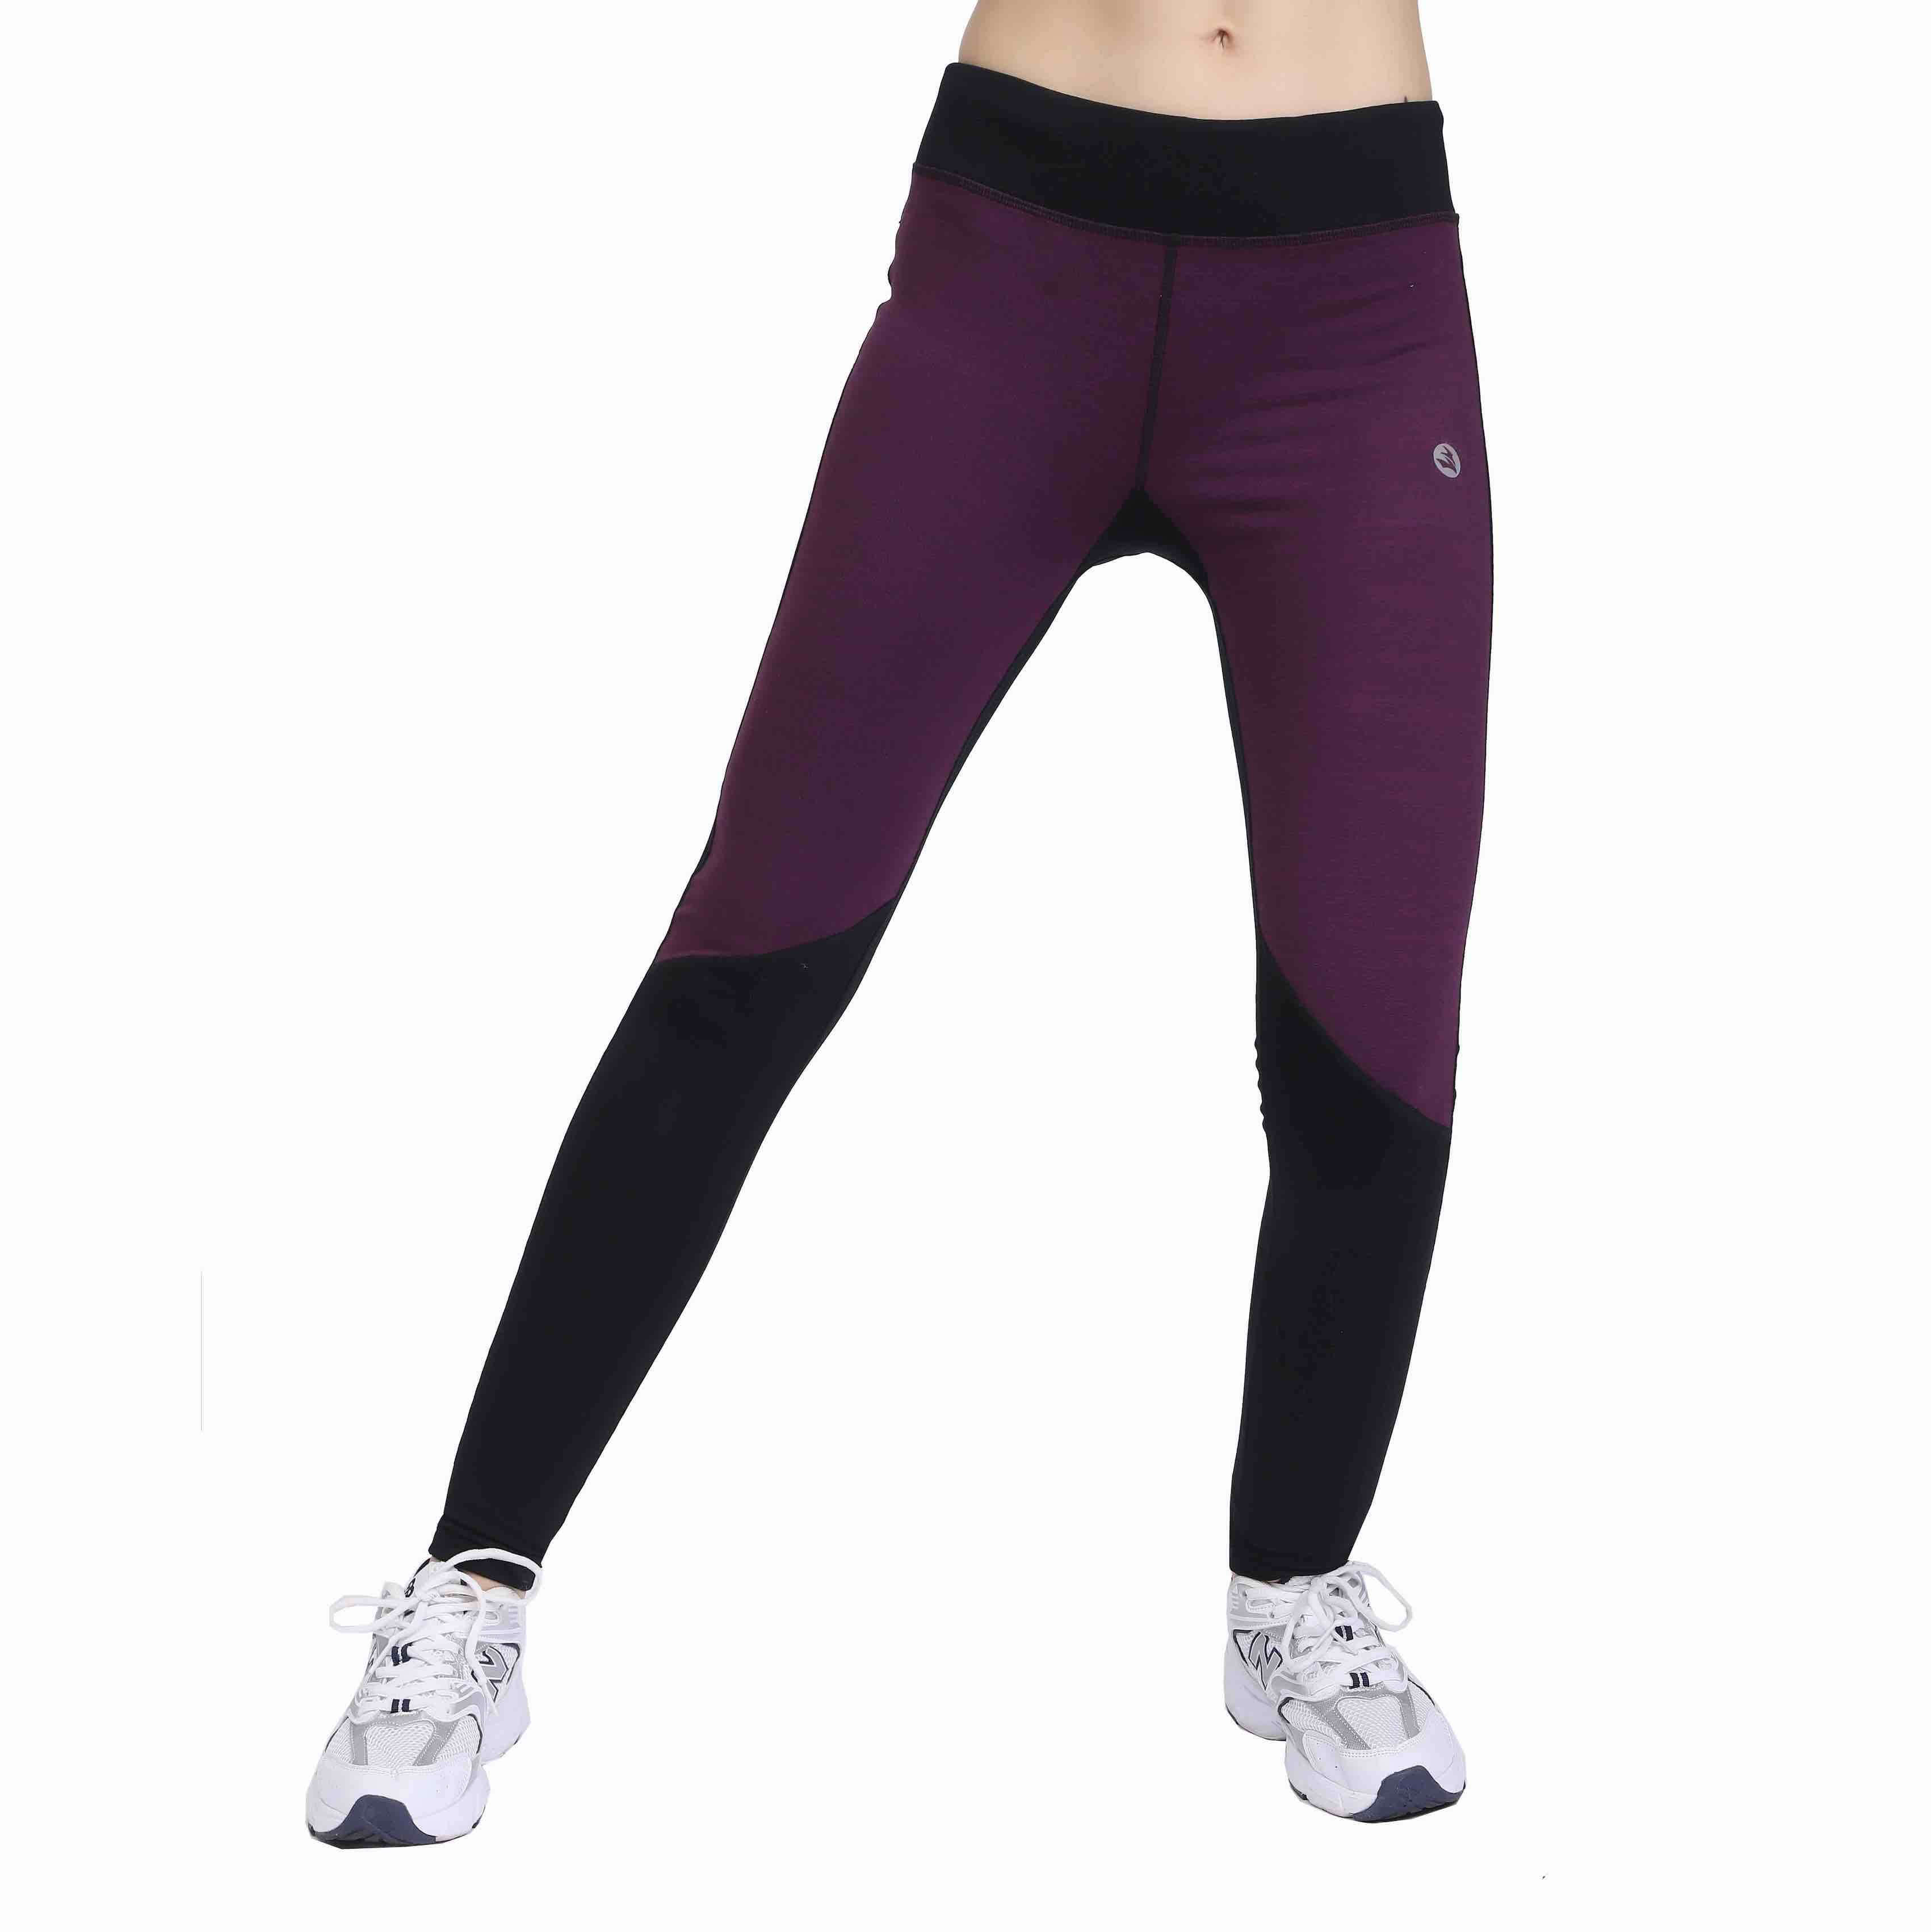 Women's Athletic Running Pants Workout Yoga Leggings Fitness Tights